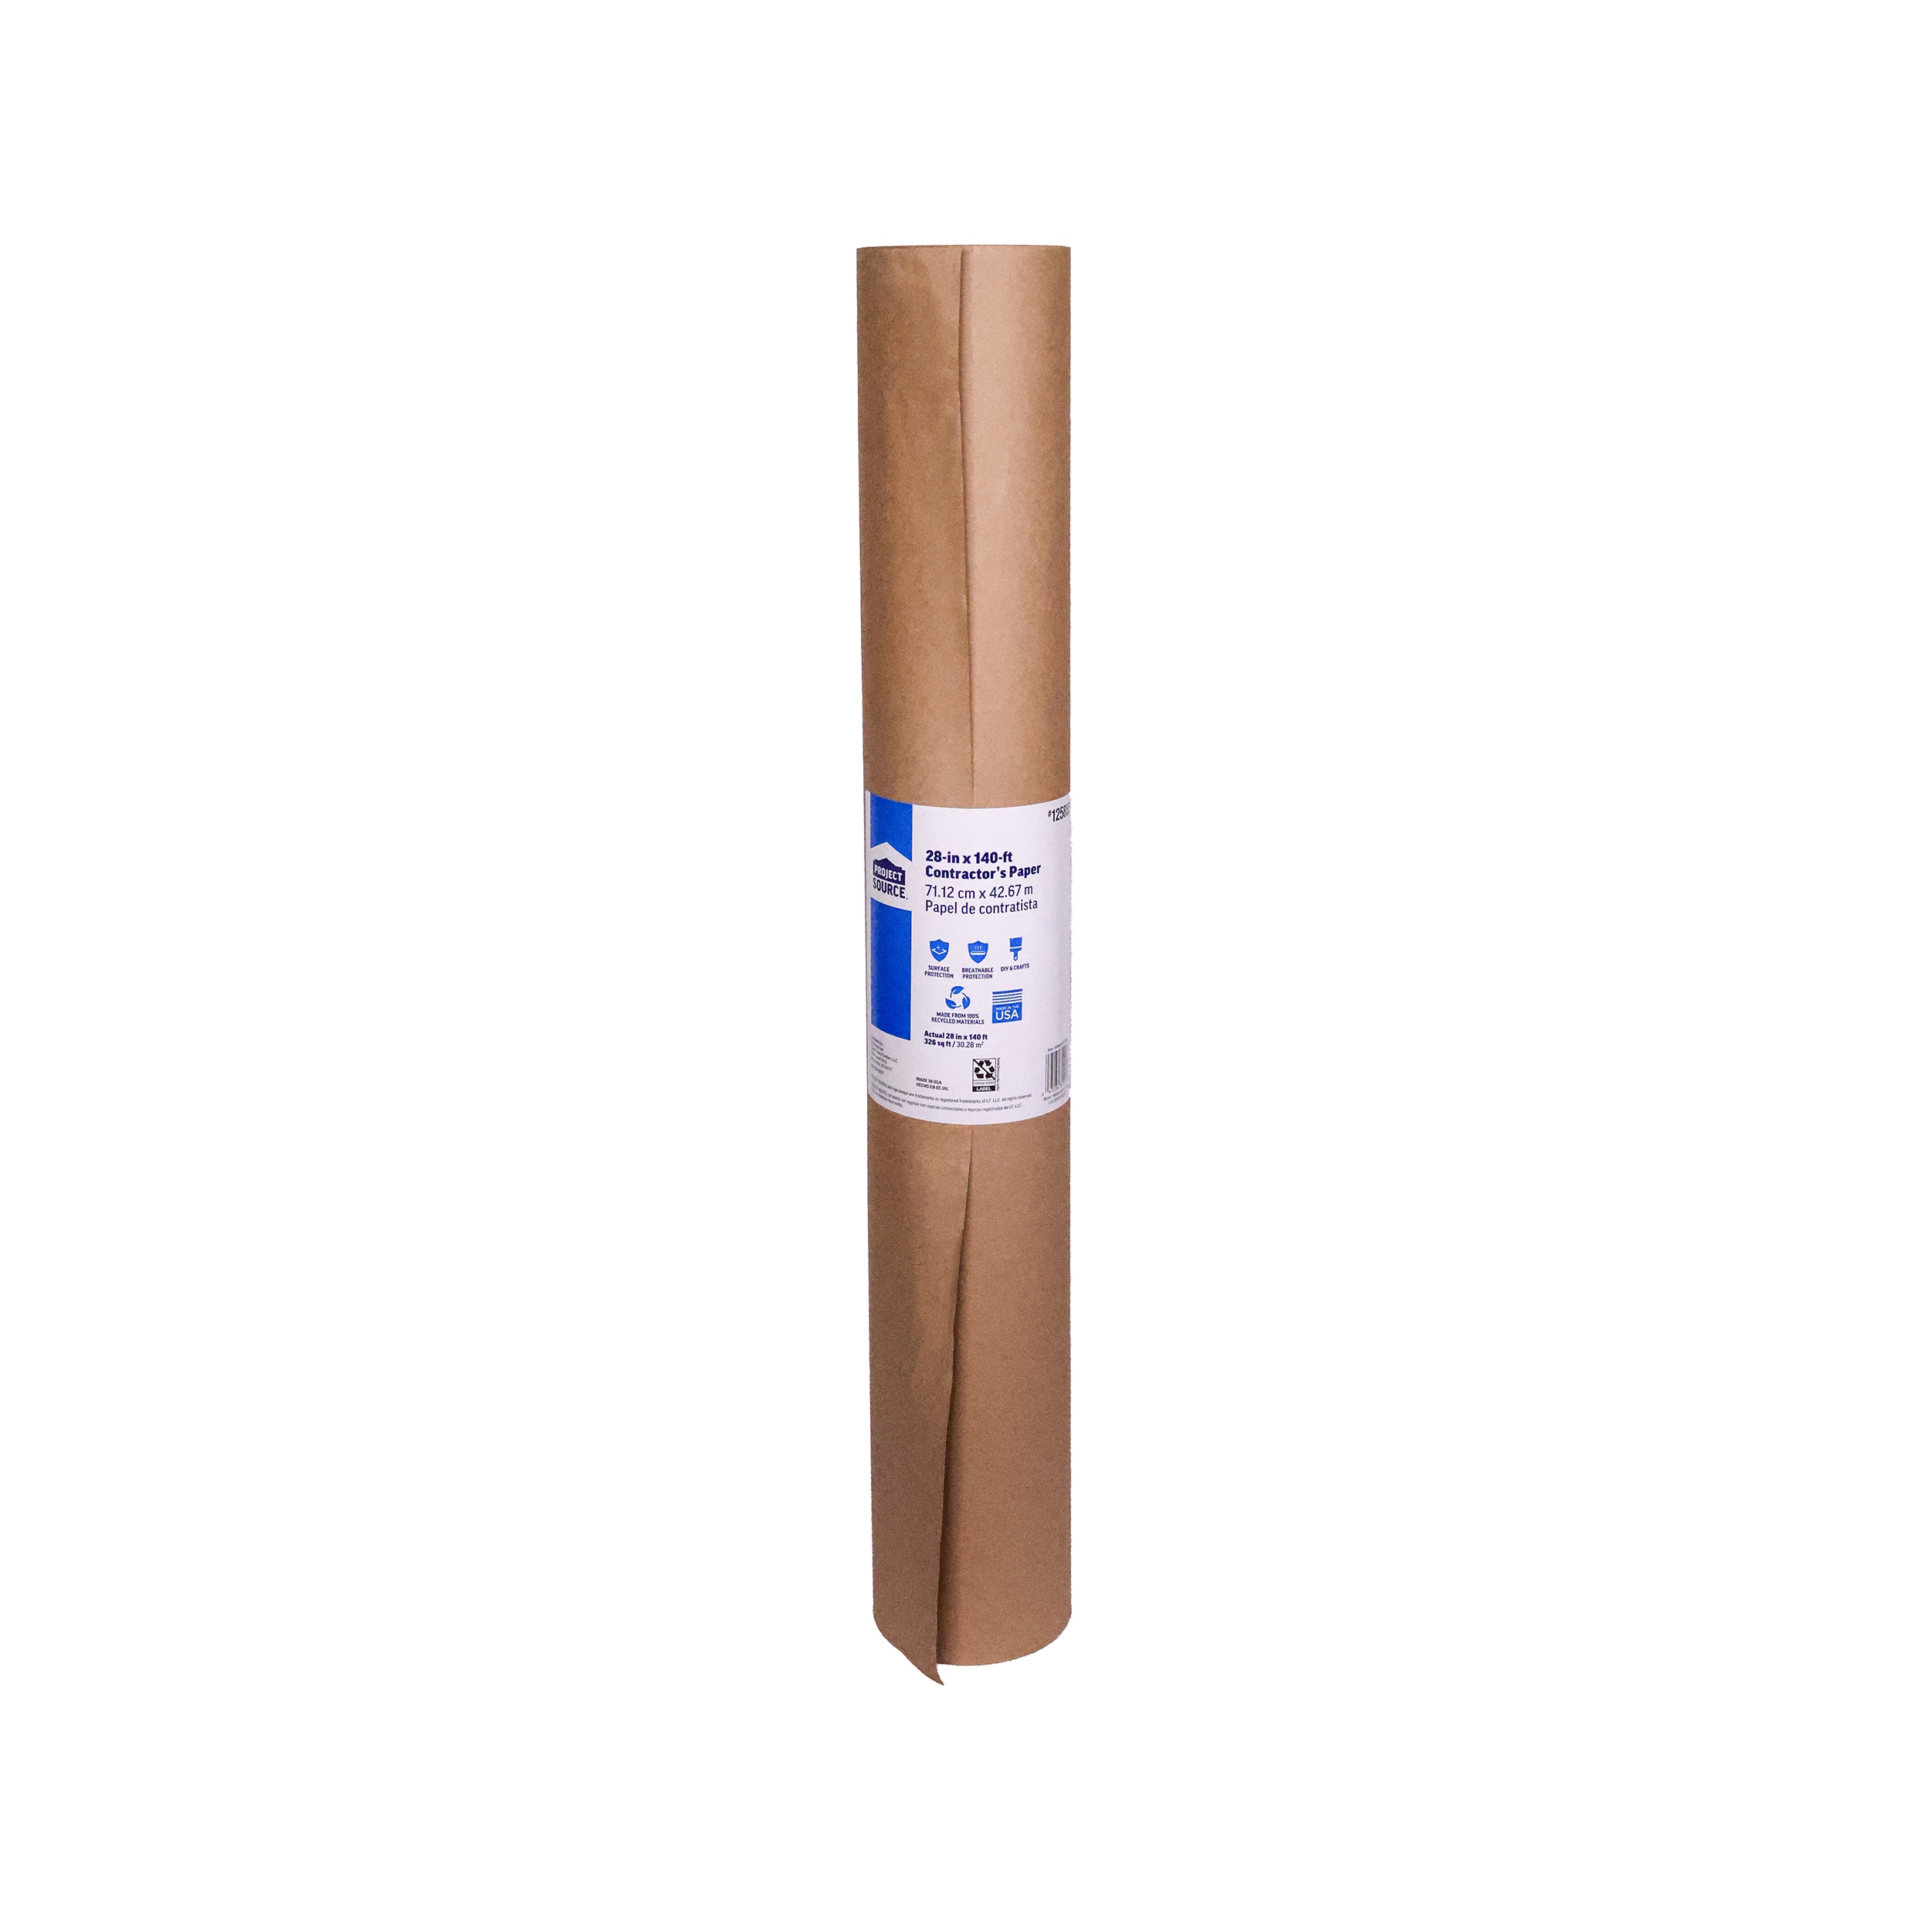 Black Kraft Arts and Crafts Paper Roll - 18 inches by 100 Feet